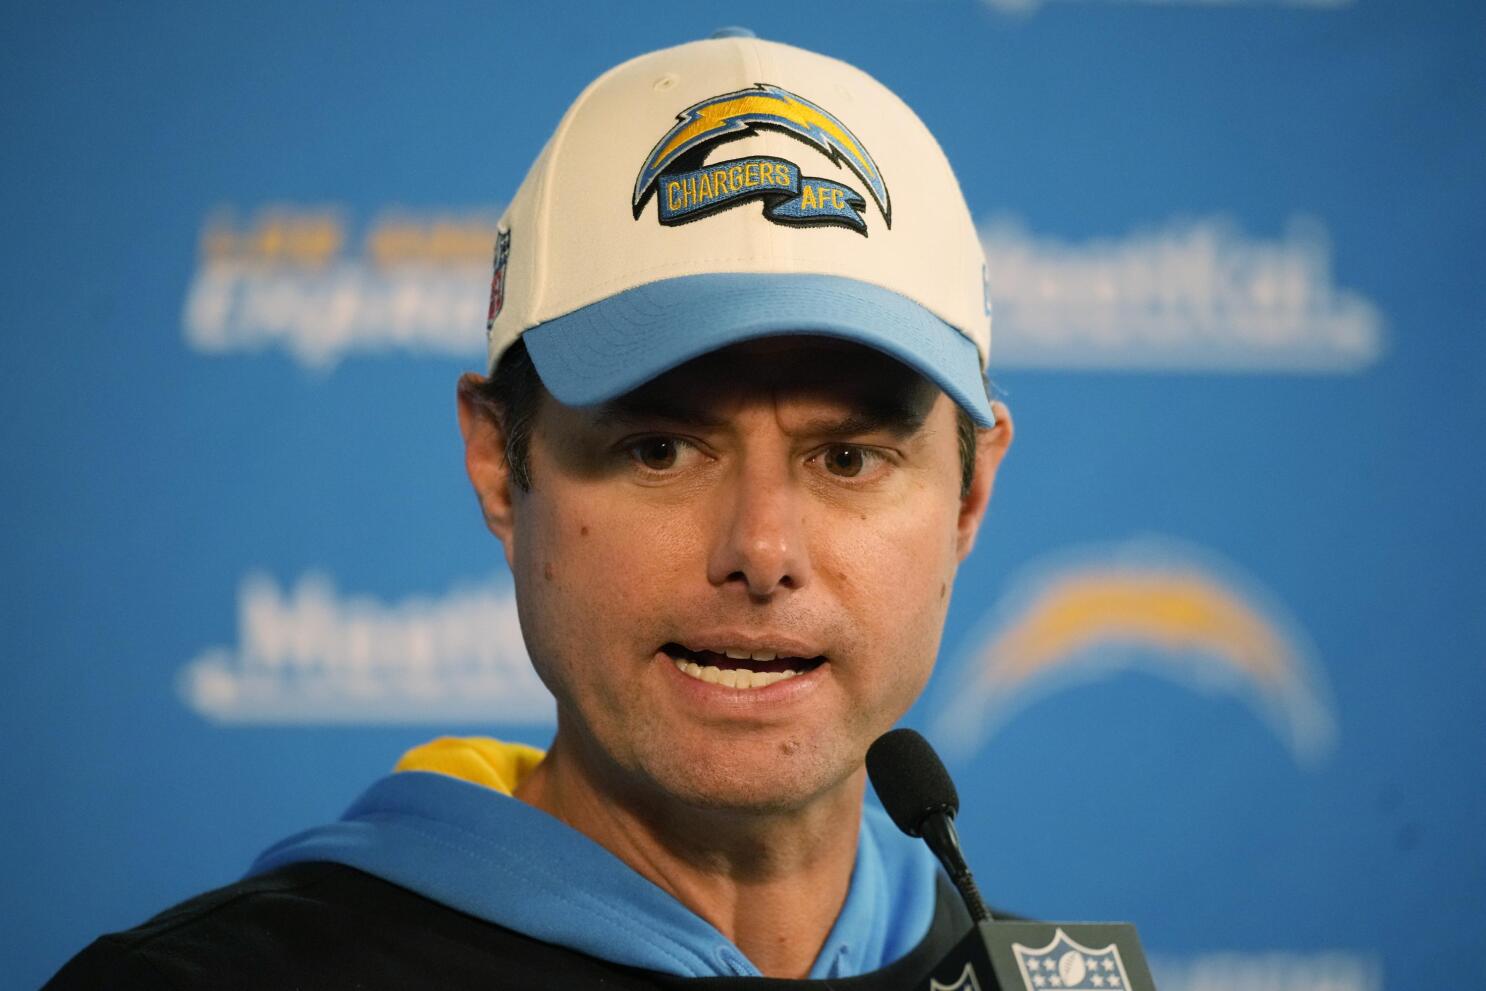 Chargers coach Anthony Lynn tabs Shane Steichen as new play-caller